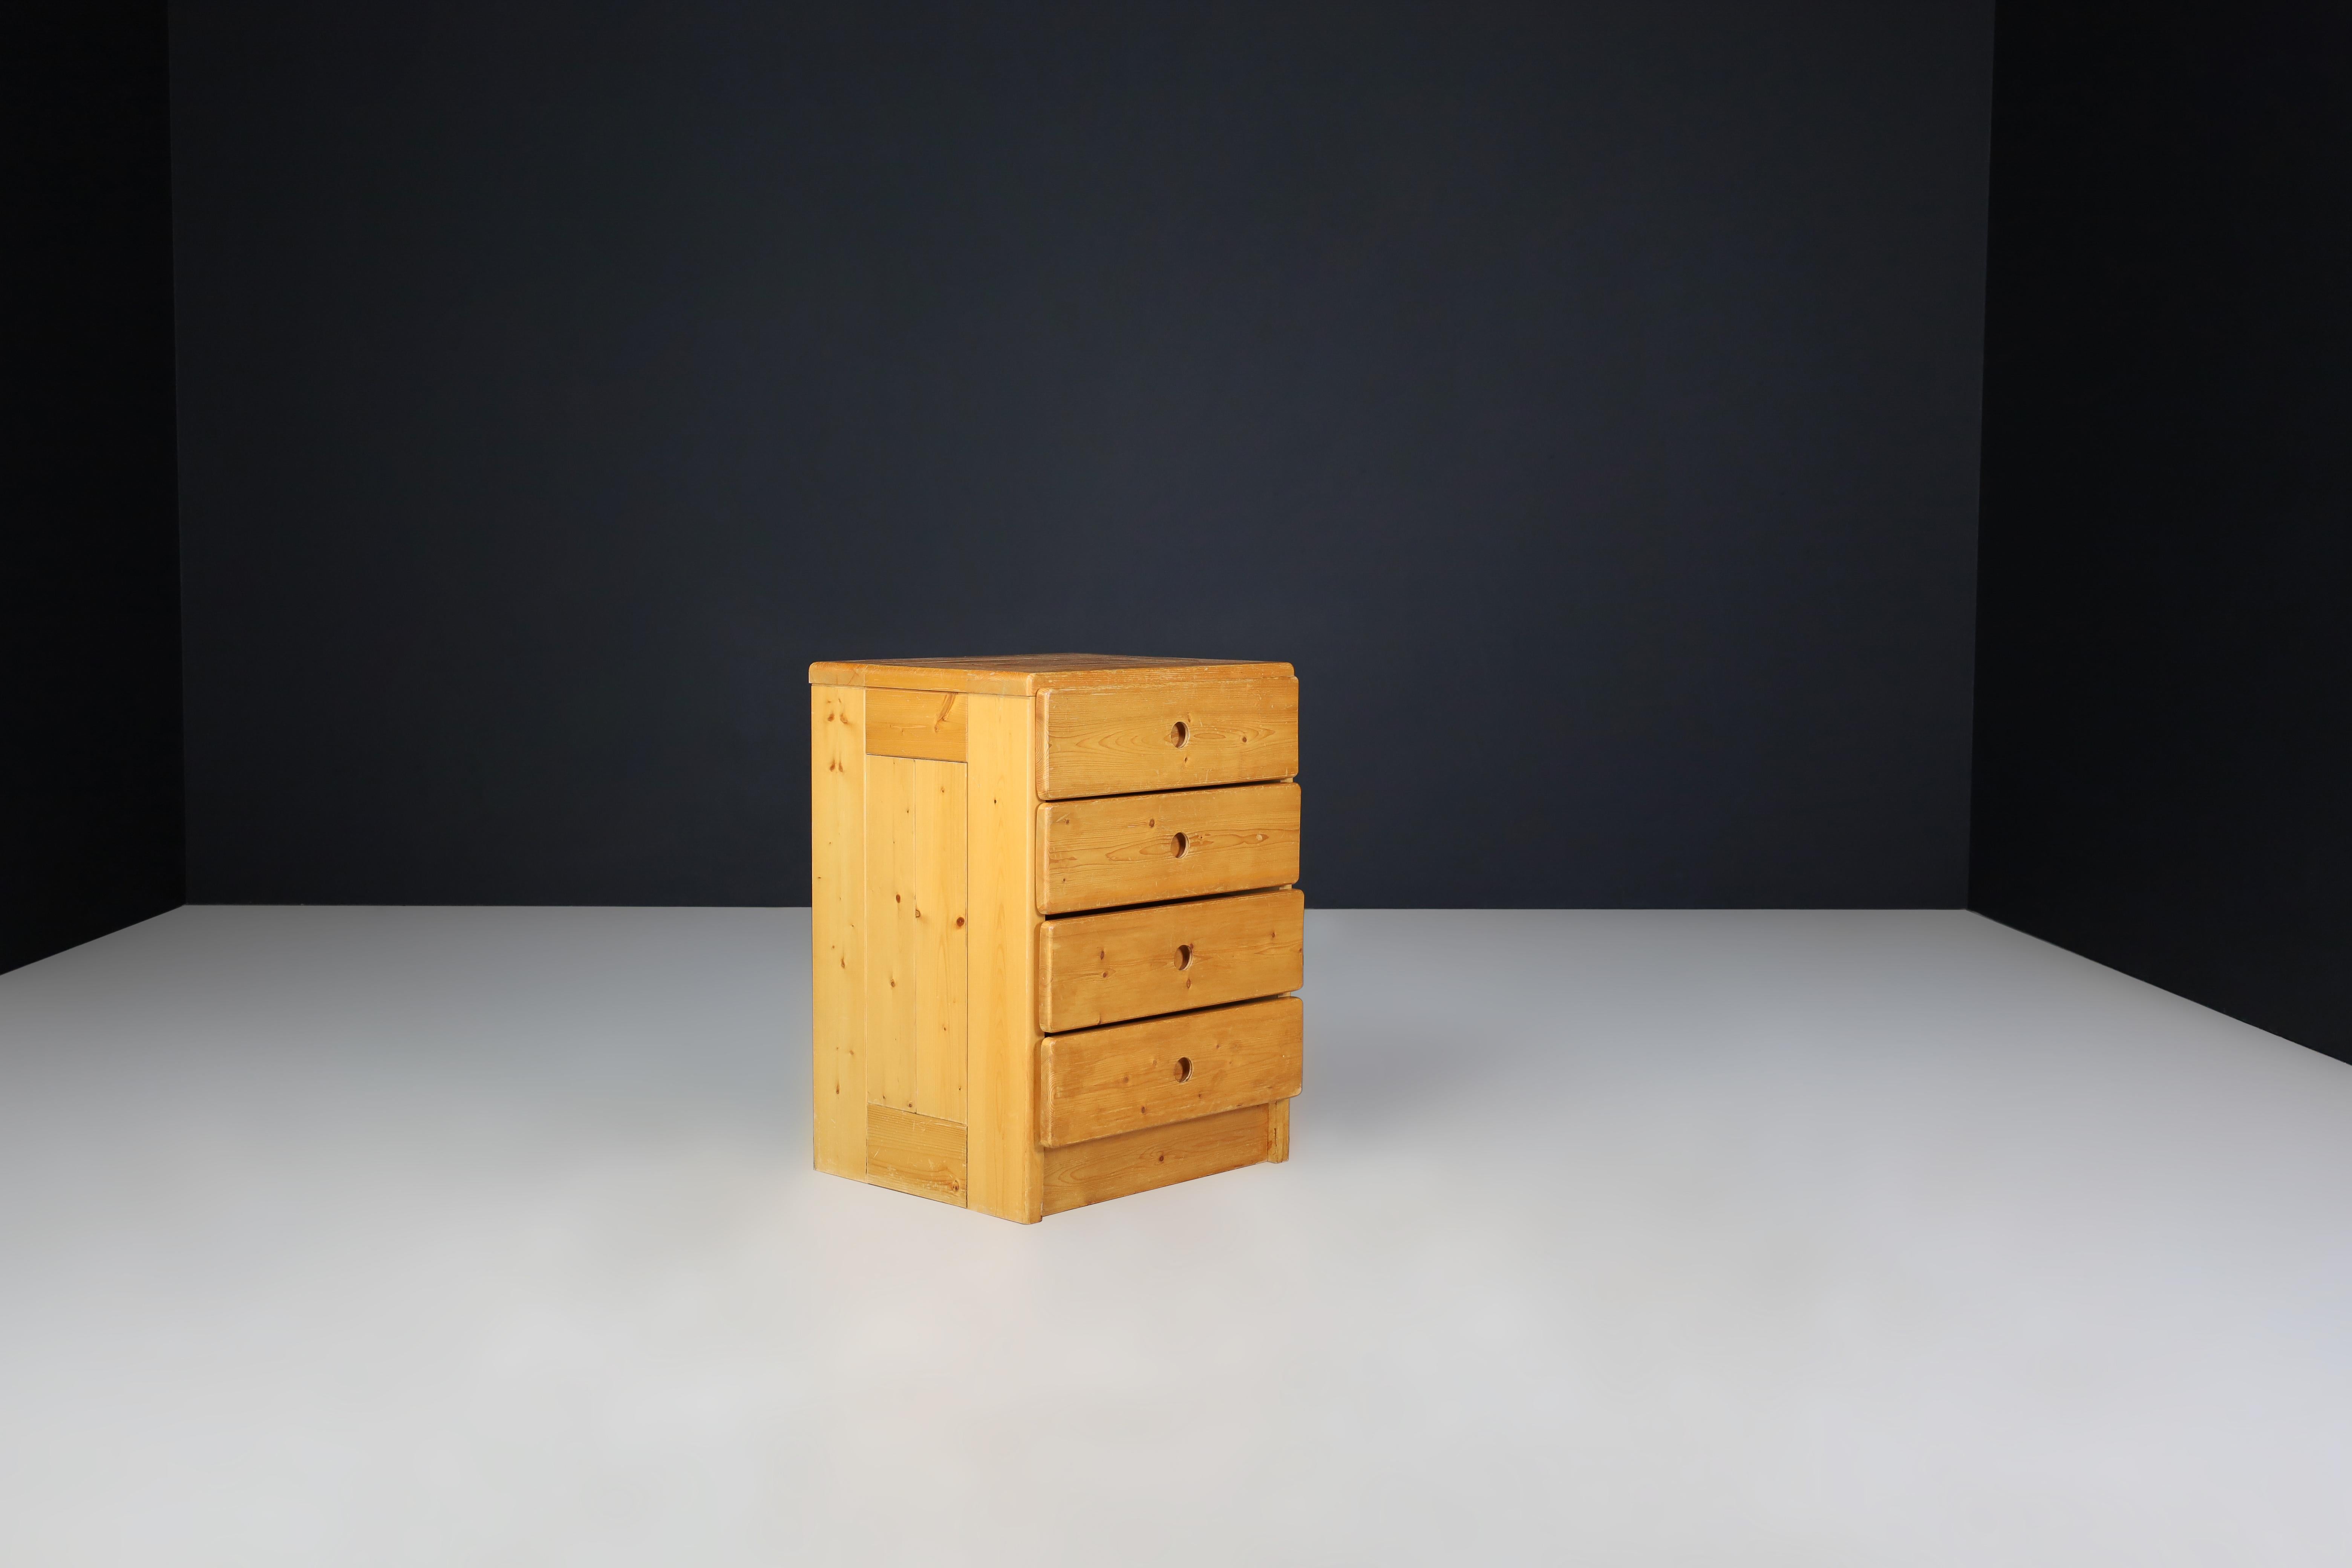 Charlotte Perriand Chest of Drawers for Les Arcs, France 1960s

This is a description of a pine chest of drawers that was designed by Charlotte Perriand for Les Arcs in the 1960s. The chest features four pull-out drawers and is made of solid pine.